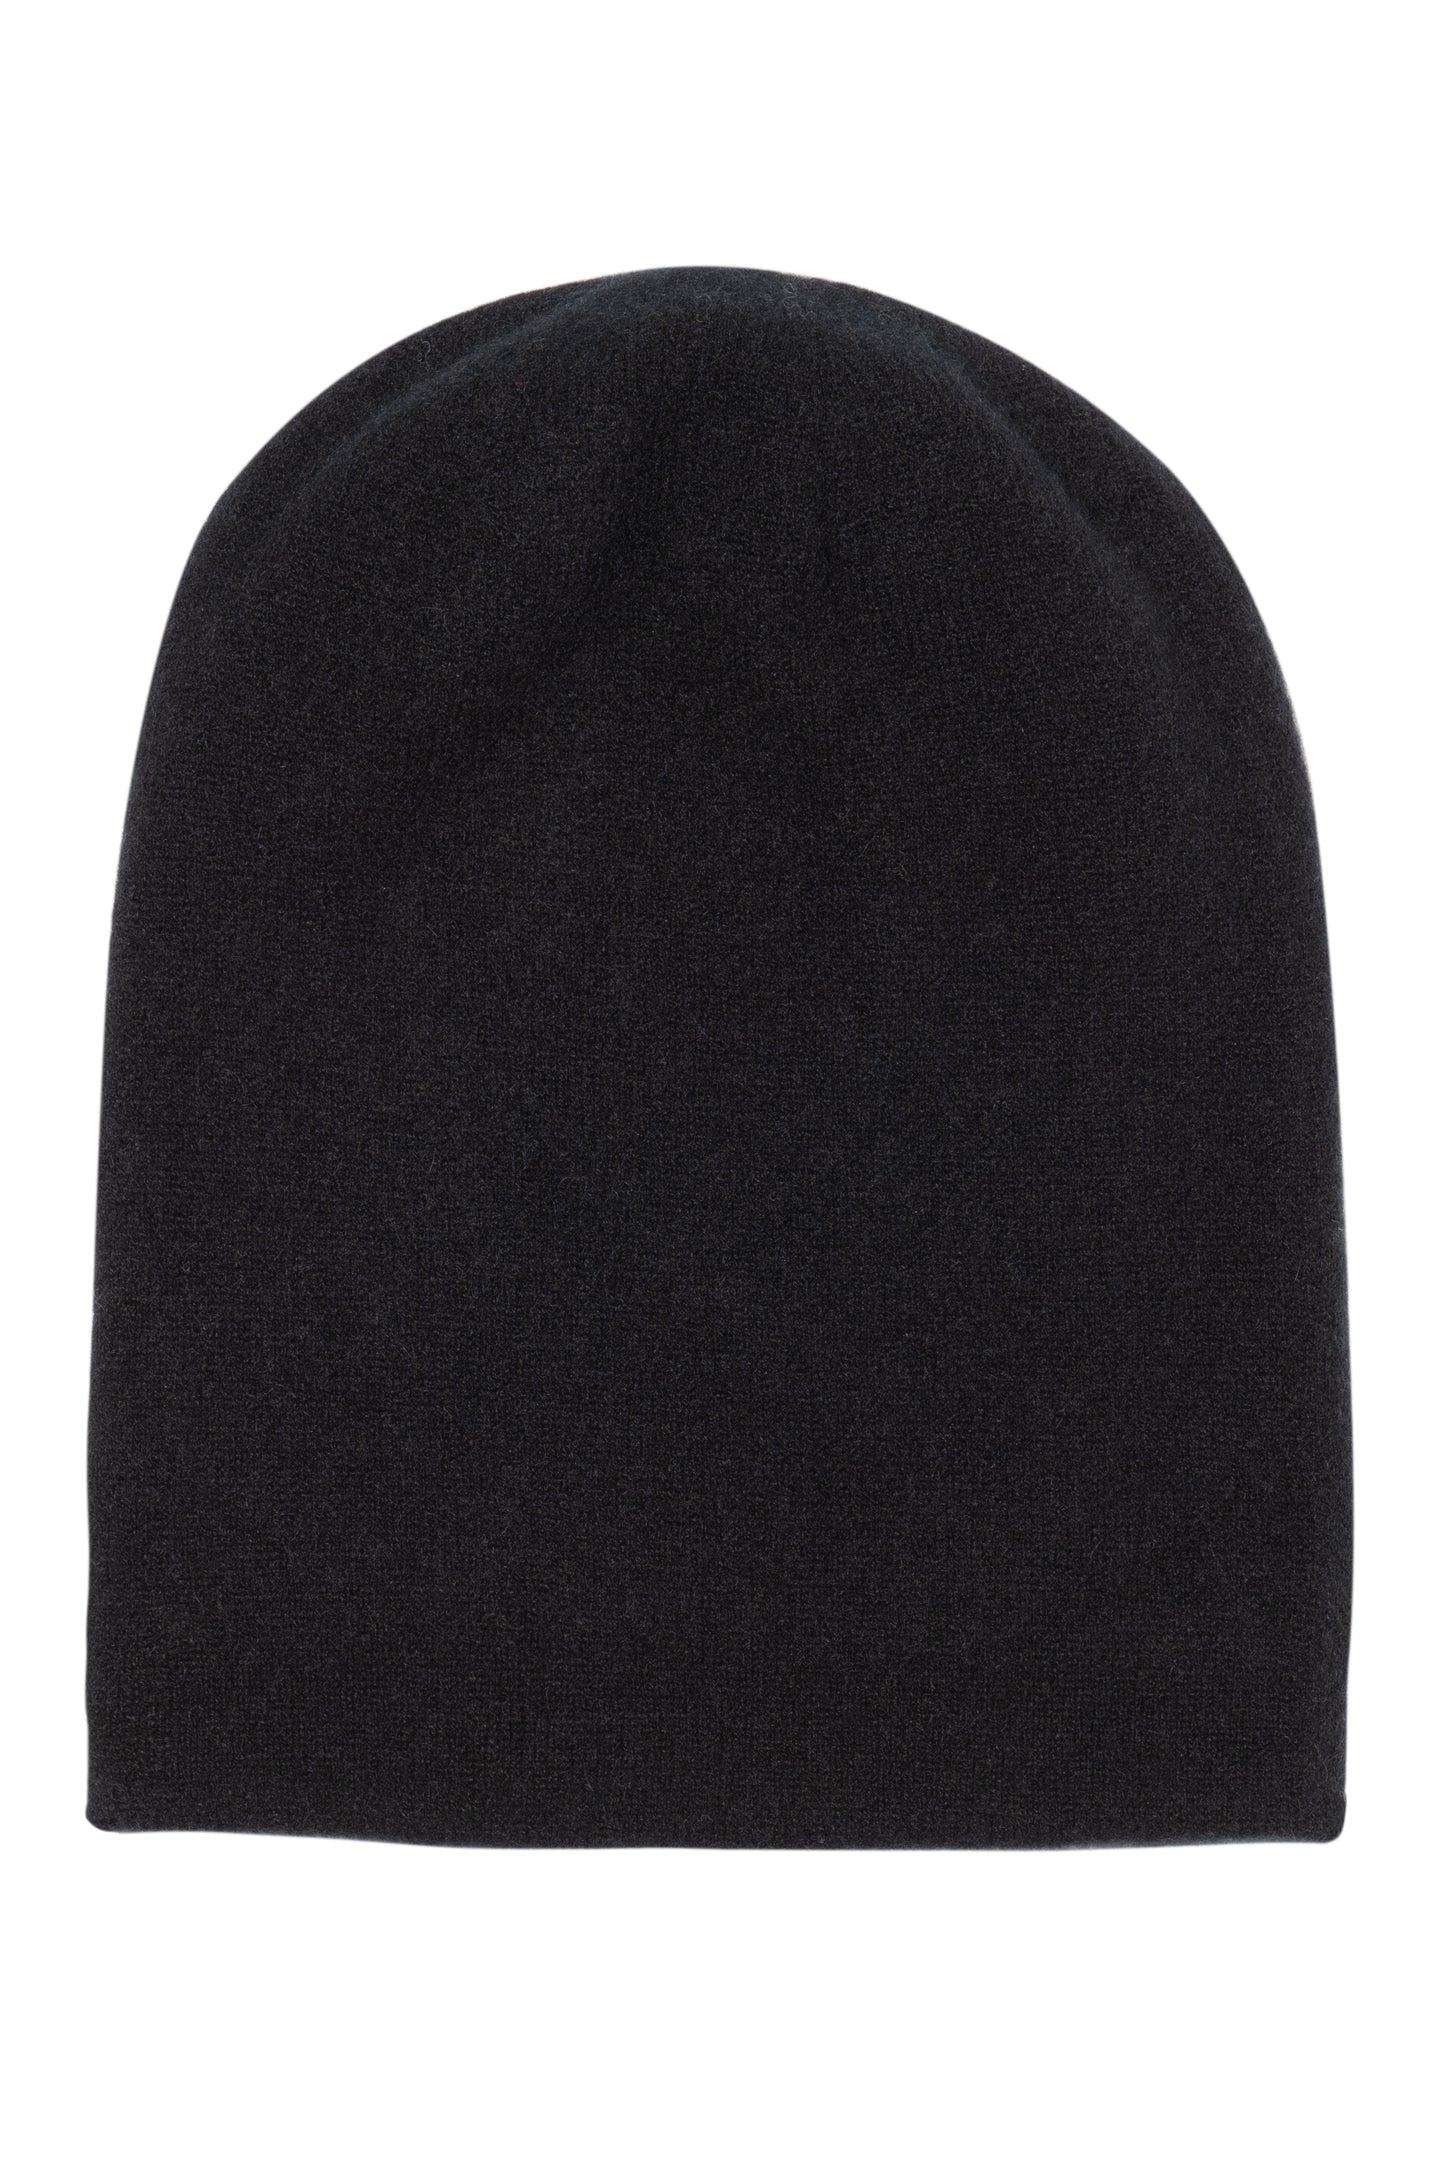 100% Double Layered Beanie Hat